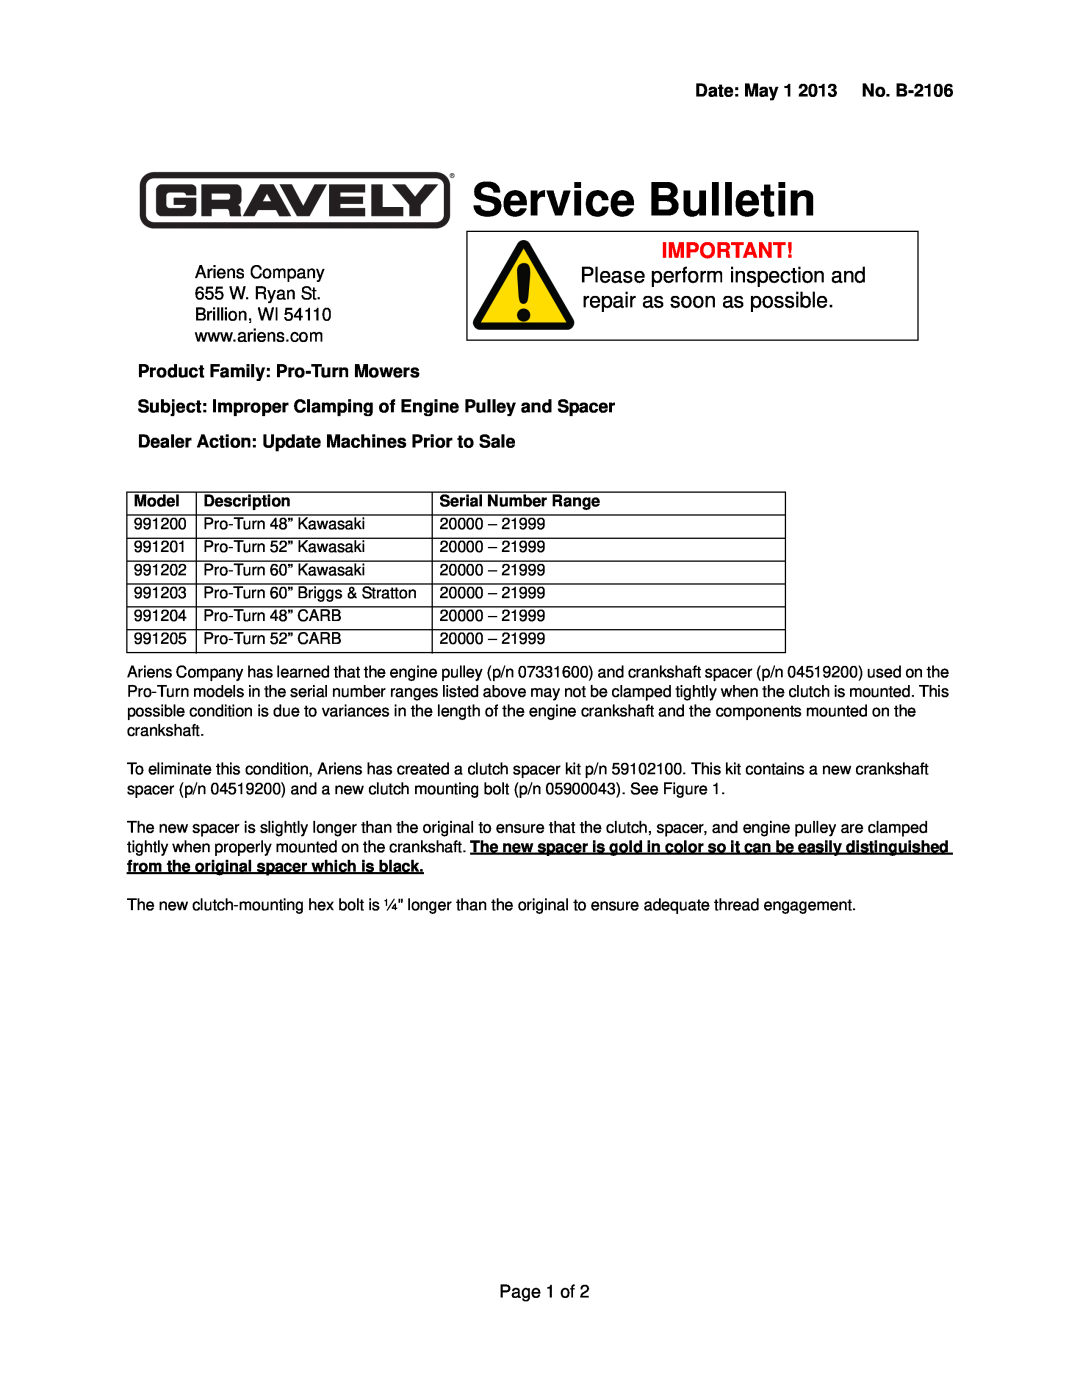 Gravely 991204 manual Date May 1 2013 No. B-2106, Product Family Pro-Turn Mowers, Service Bulletin, Model, Description 